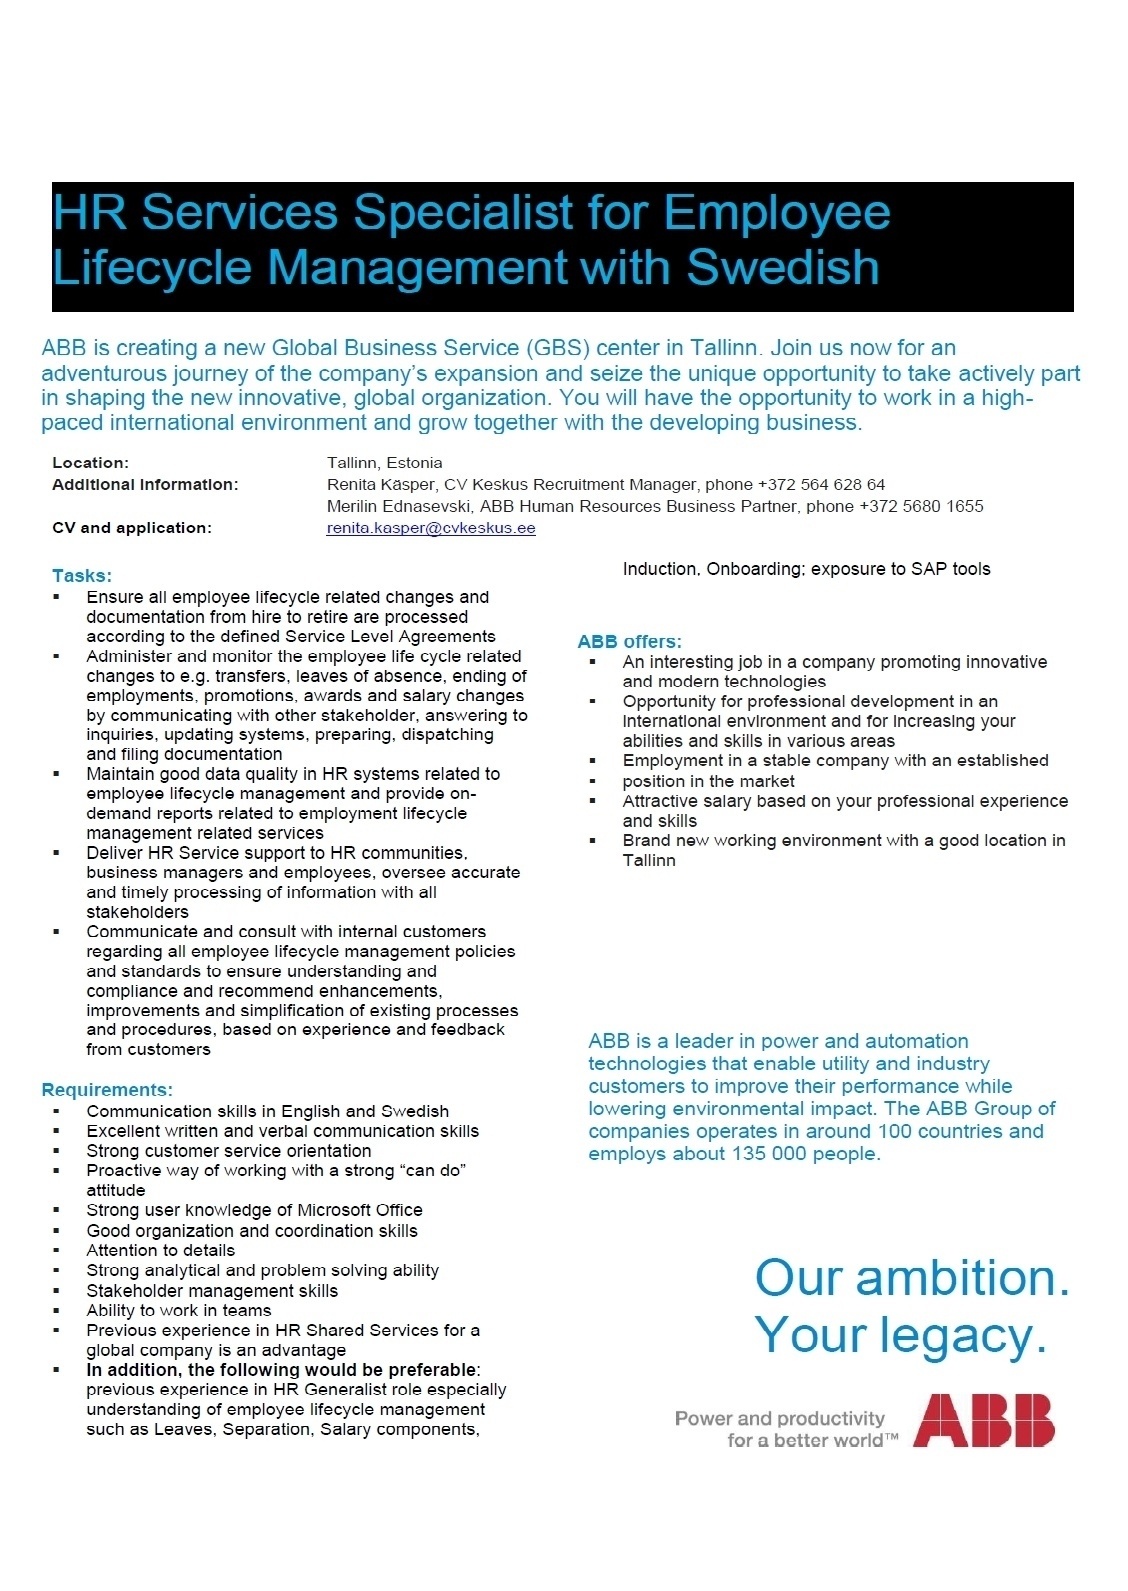 CV KESKUS OÜ ABB is looking for an HR Services Specialist for Employee Lifecycle Management with Swedish